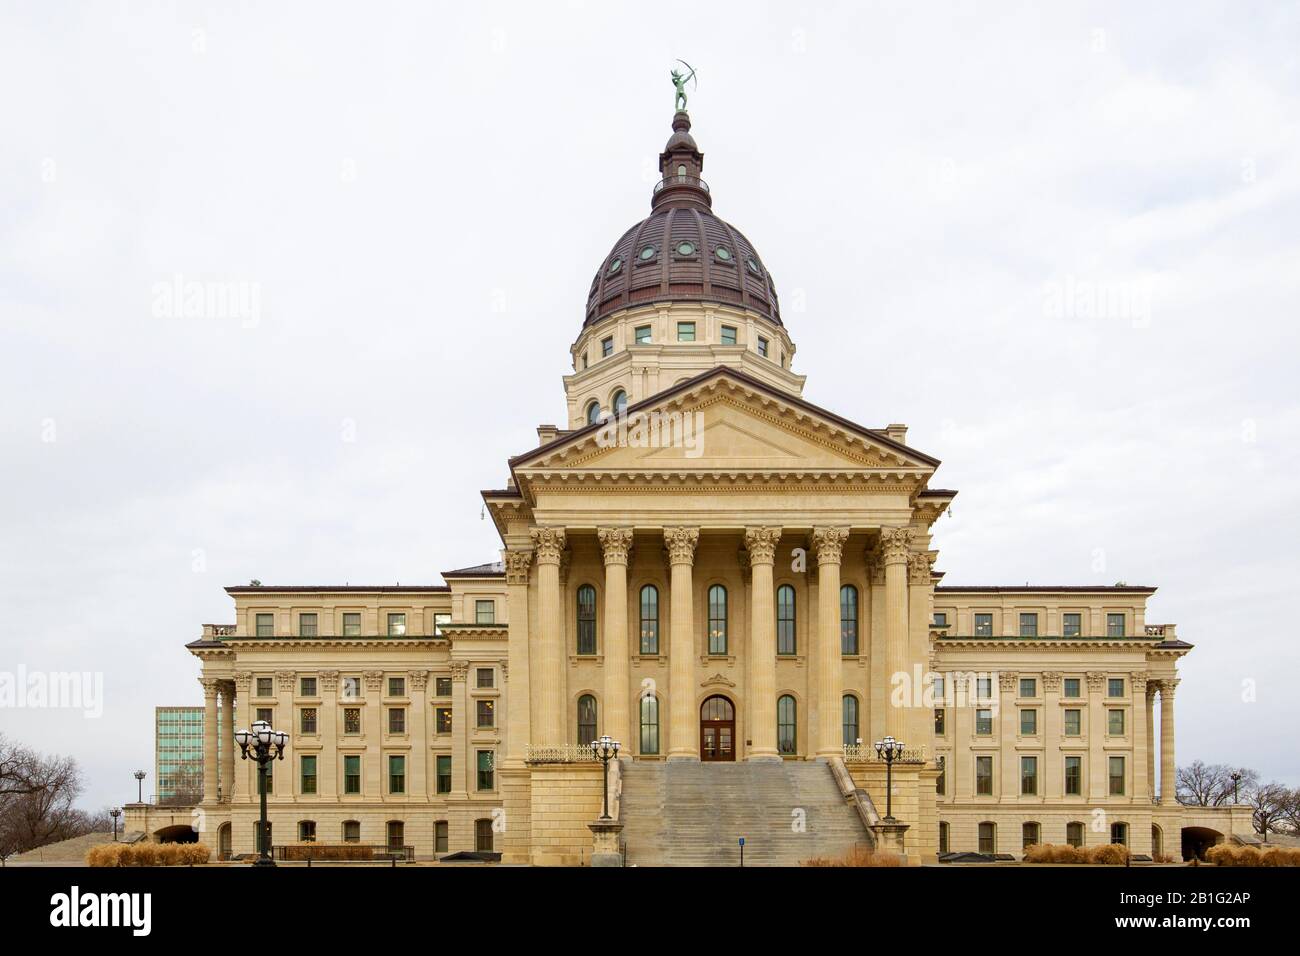 The Kansas State Capitol located in Topeka is the building housing the executive and legislative branches of government for the U.S. state of Kansas. Stock Photo